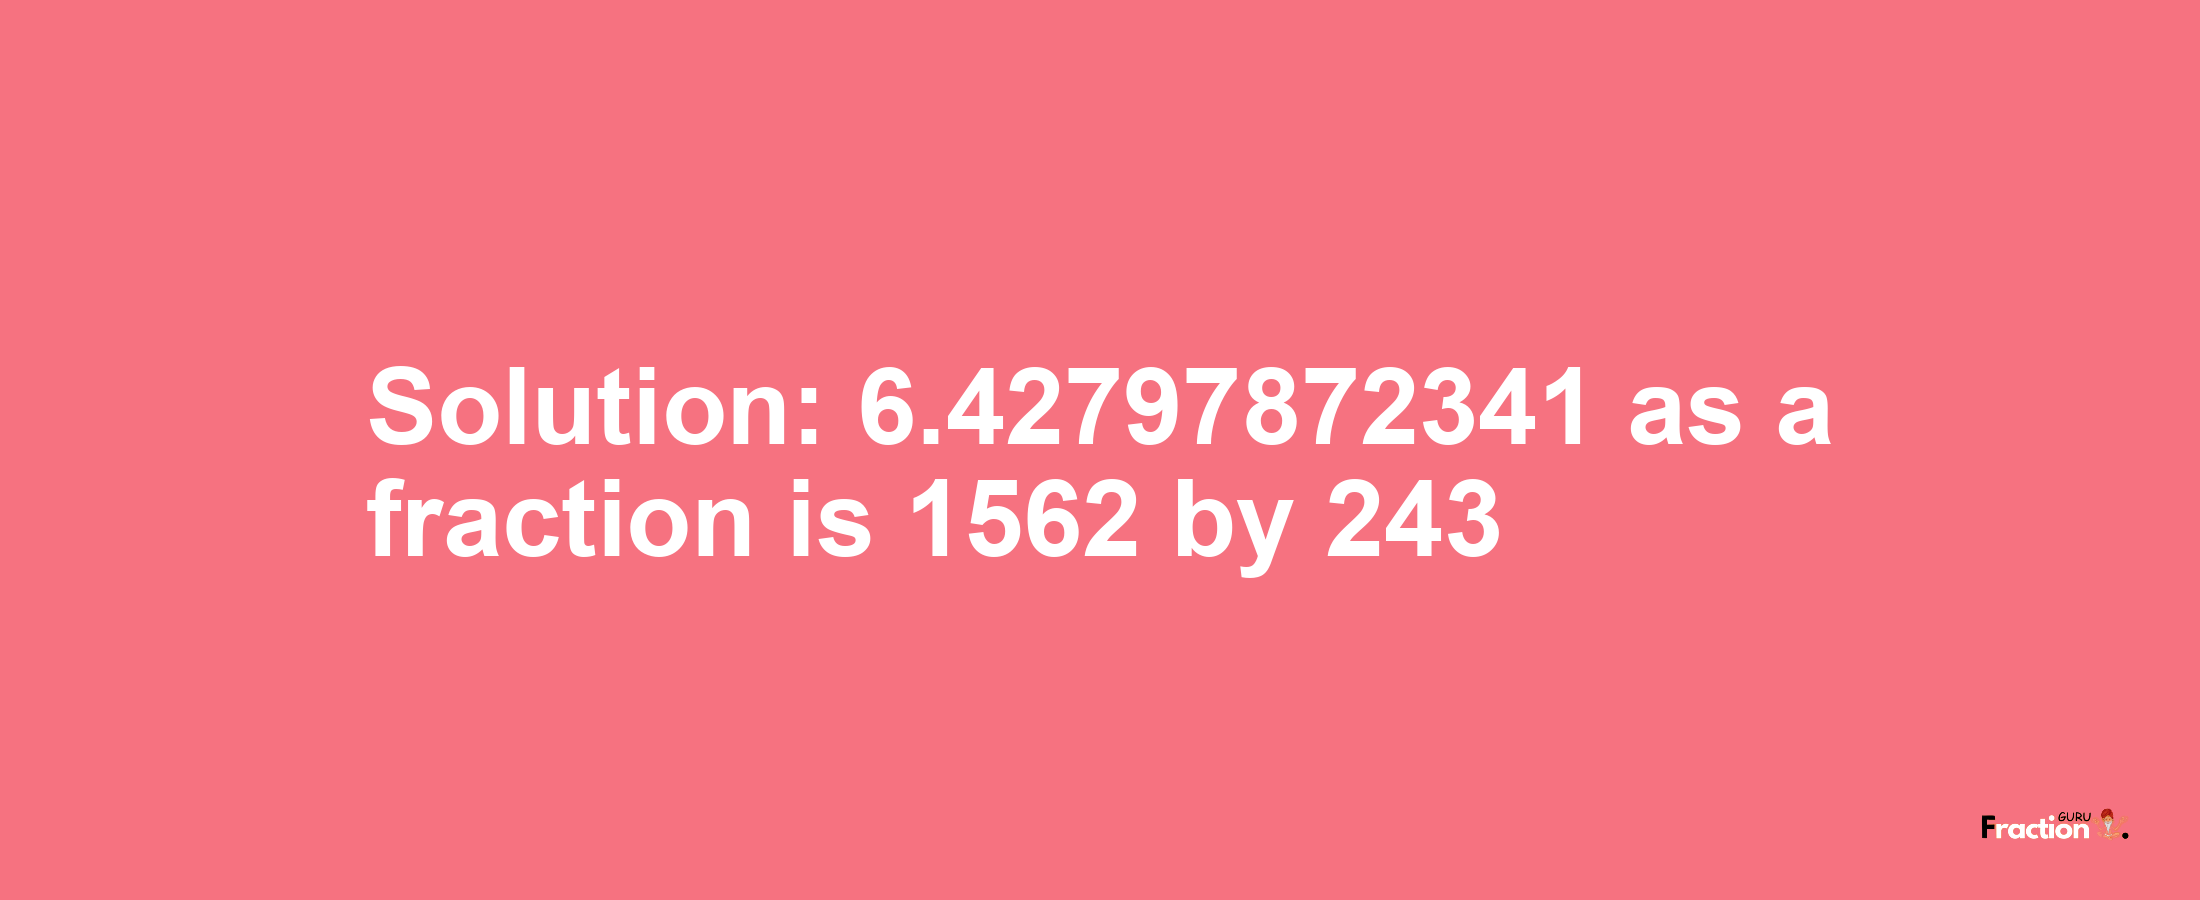 Solution:6.42797872341 as a fraction is 1562/243